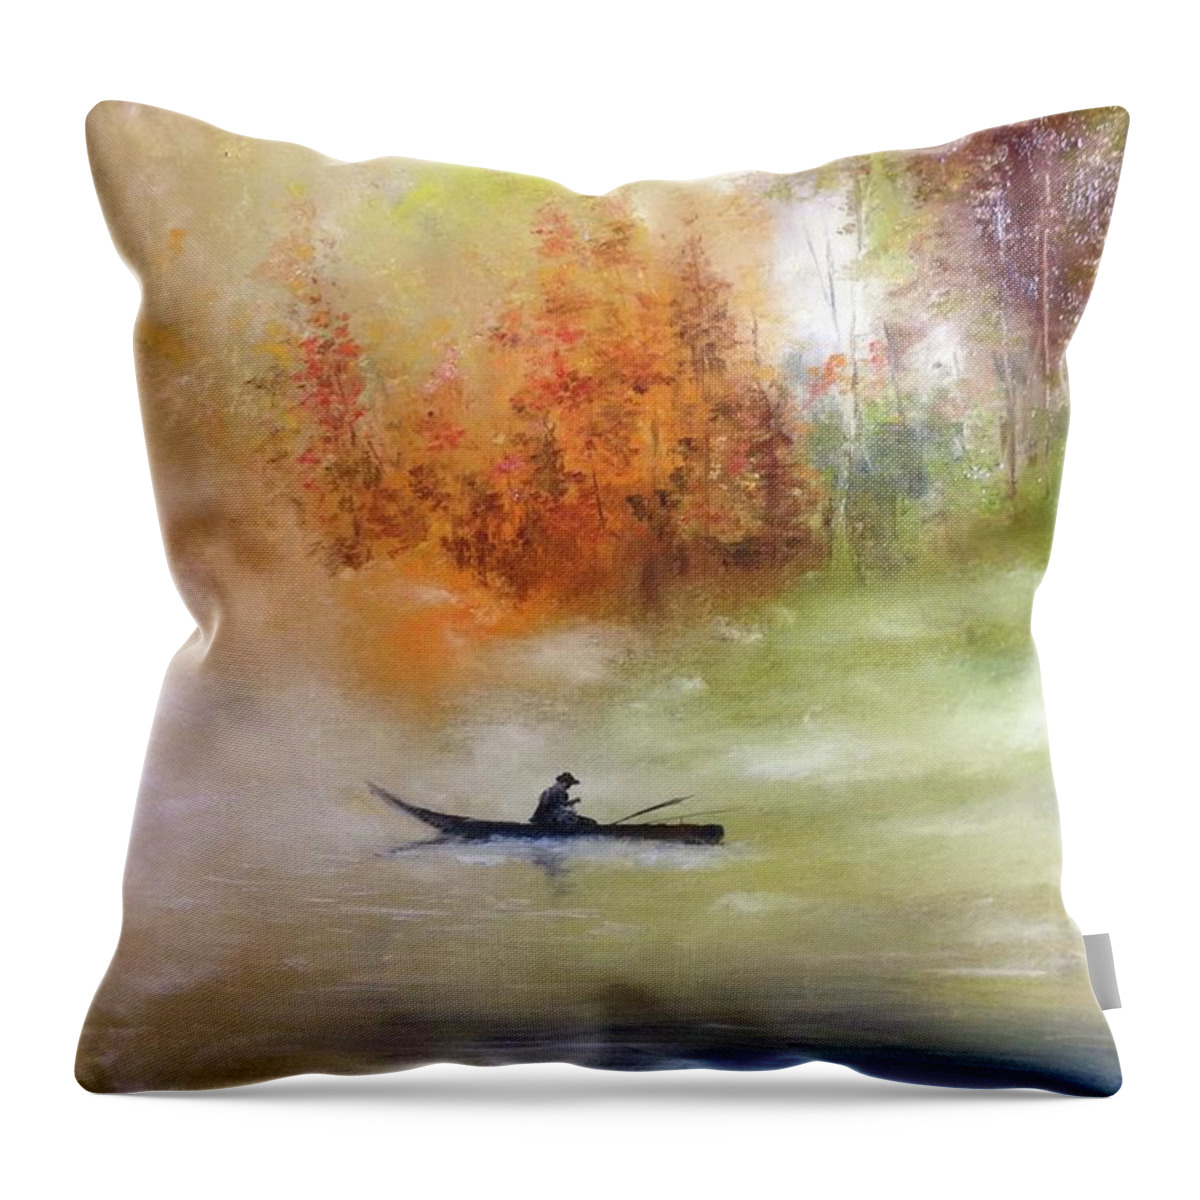 Autumn Throw Pillow featuring the painting Autumn dawning, Autumn colours, Fisherman on an autumn lake by Lizzy Forrester